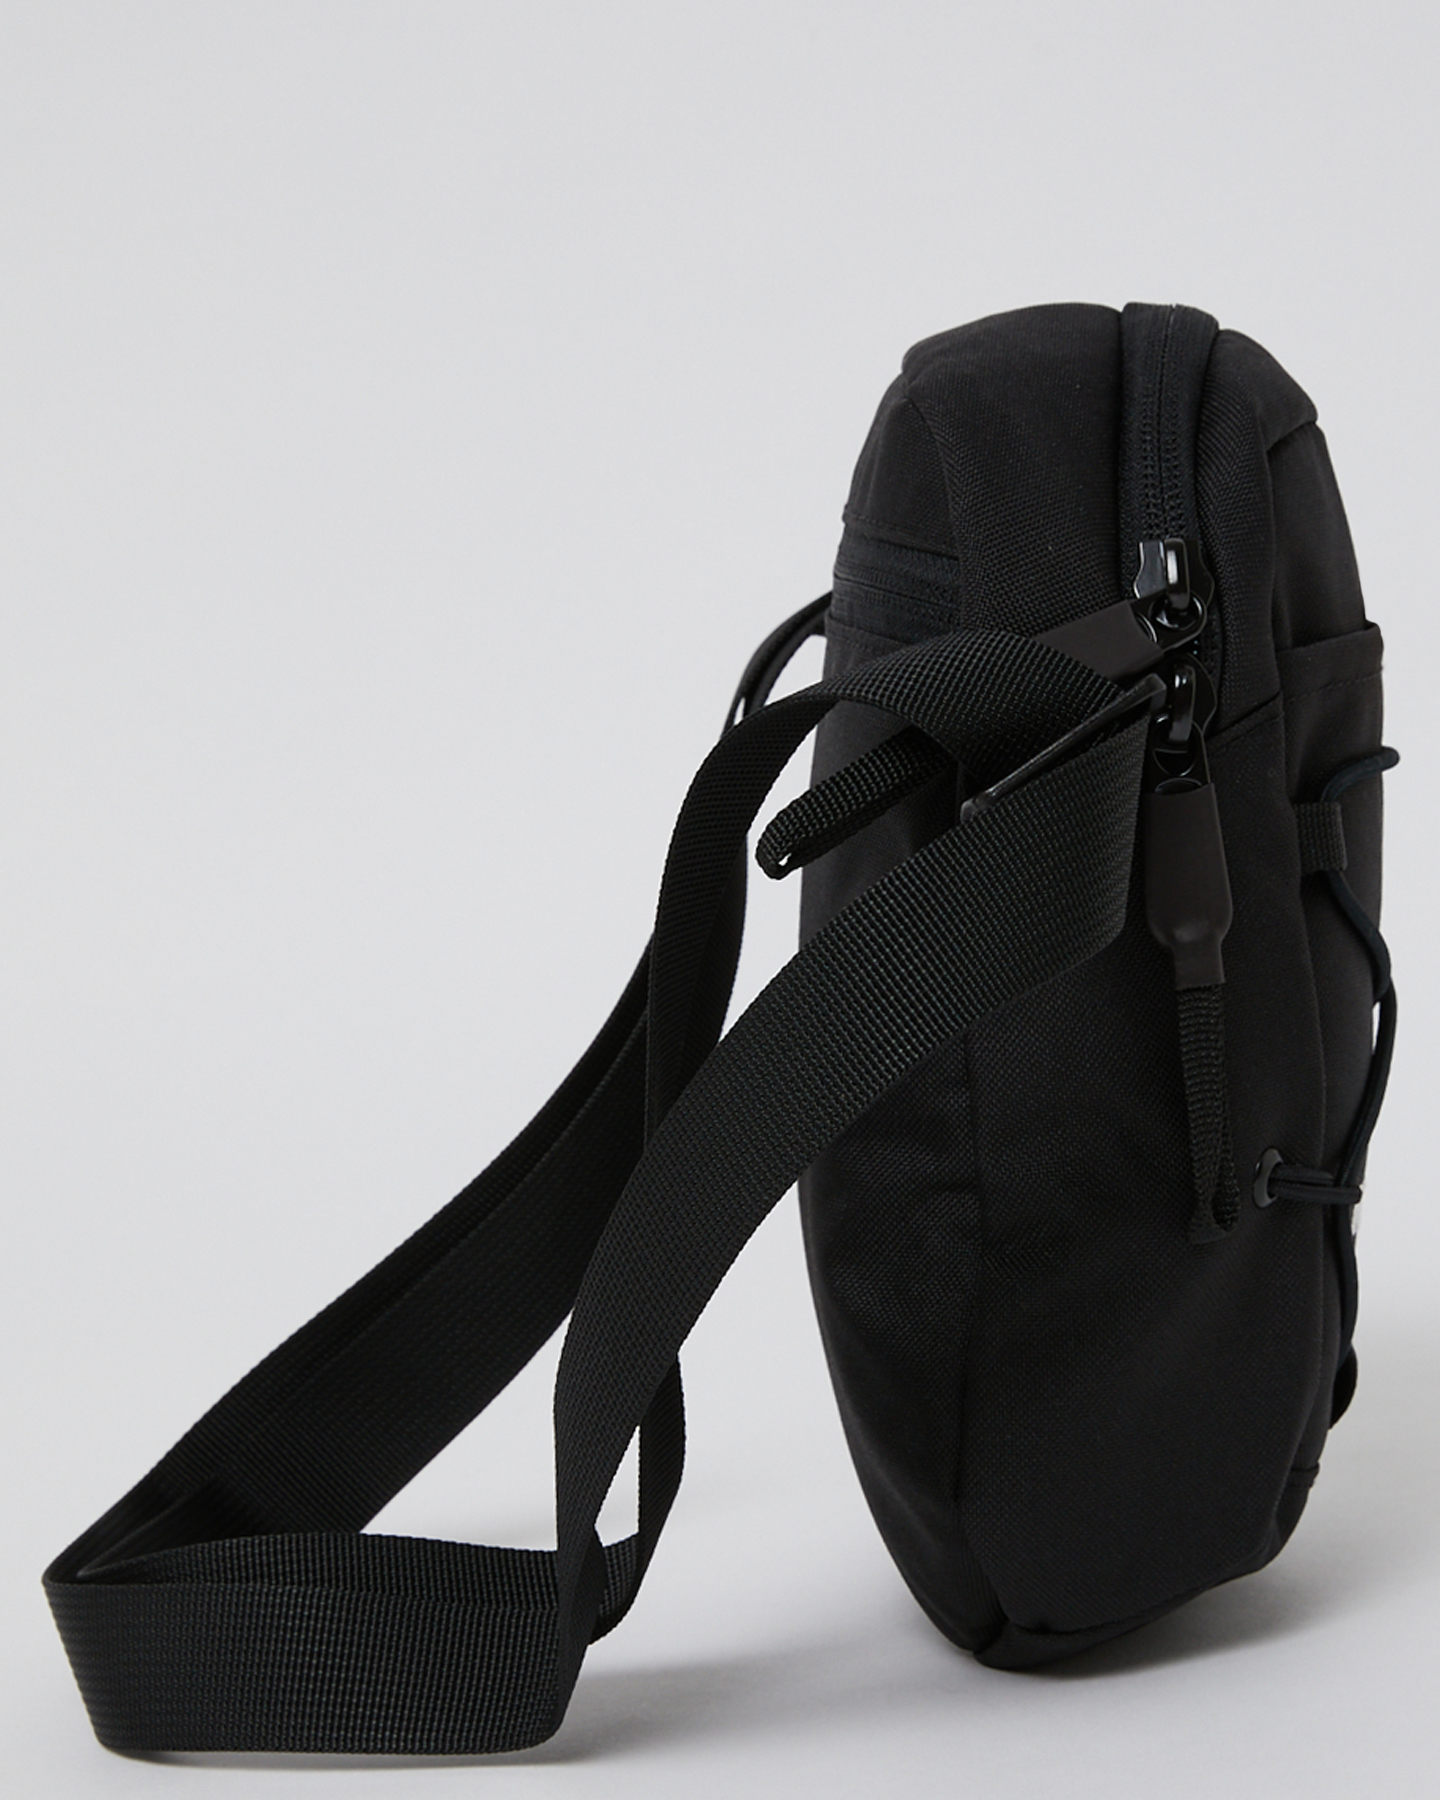 The North Face Jester Crossbody Bag - Black | SurfStitch